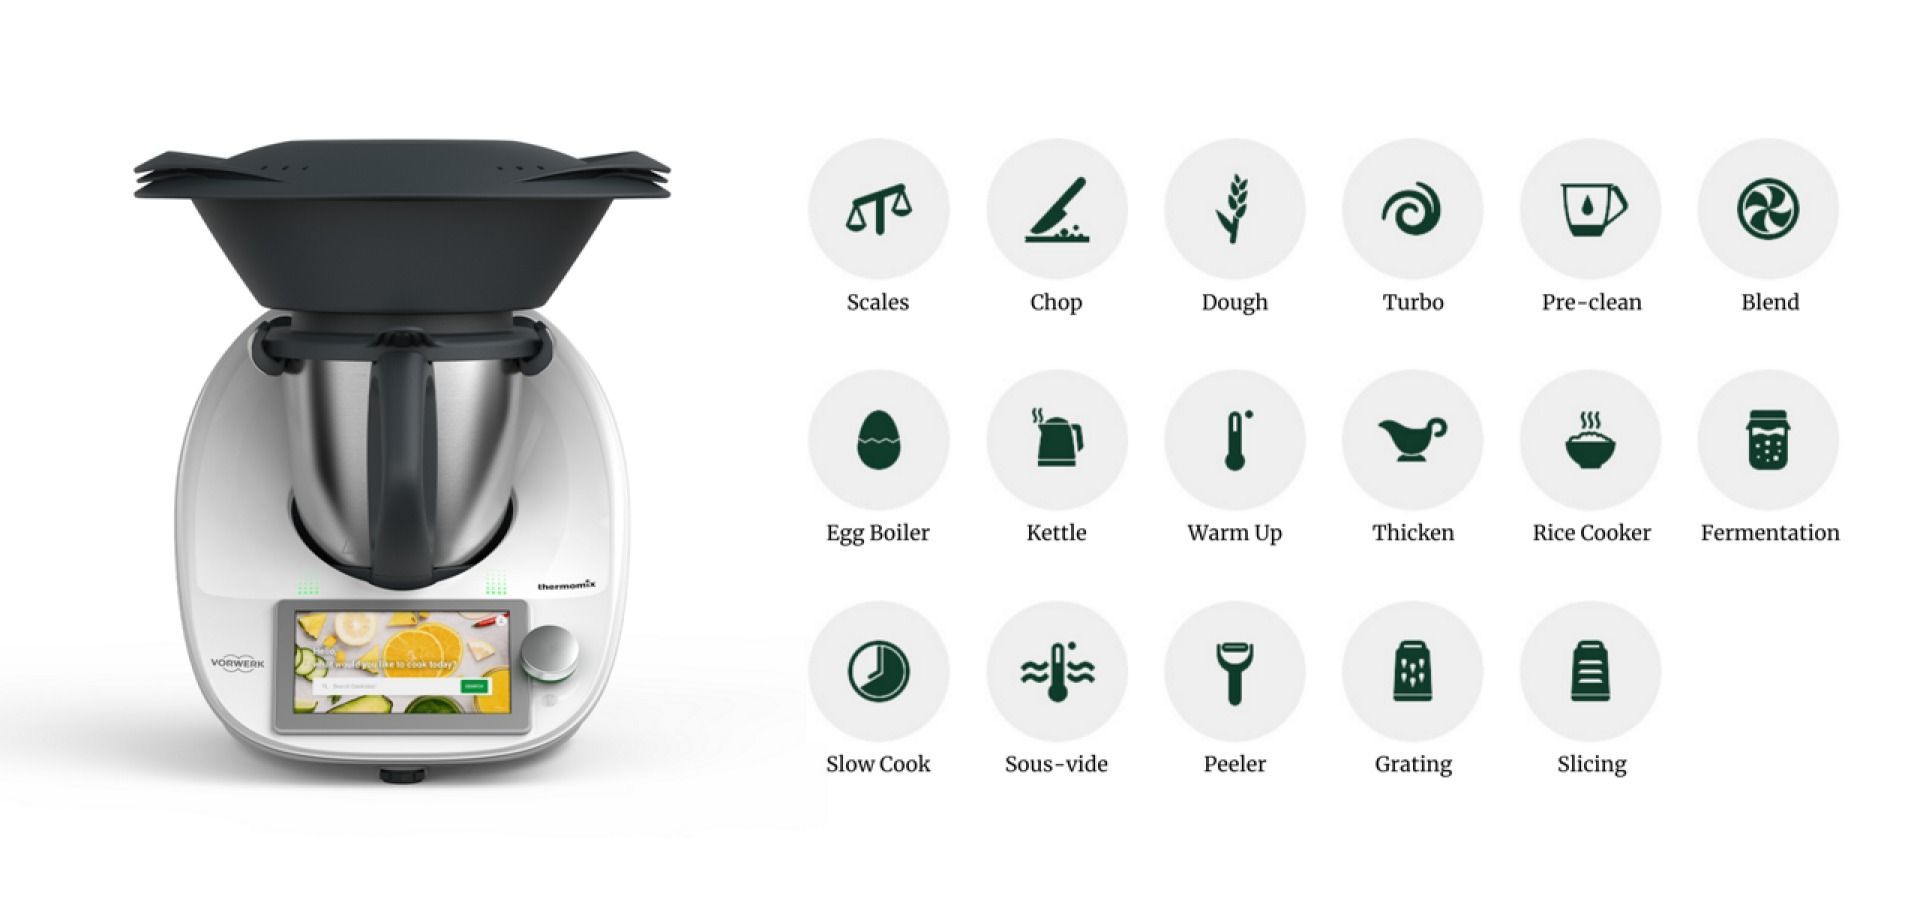 What is a Thermomix? Explanation by Mammamix